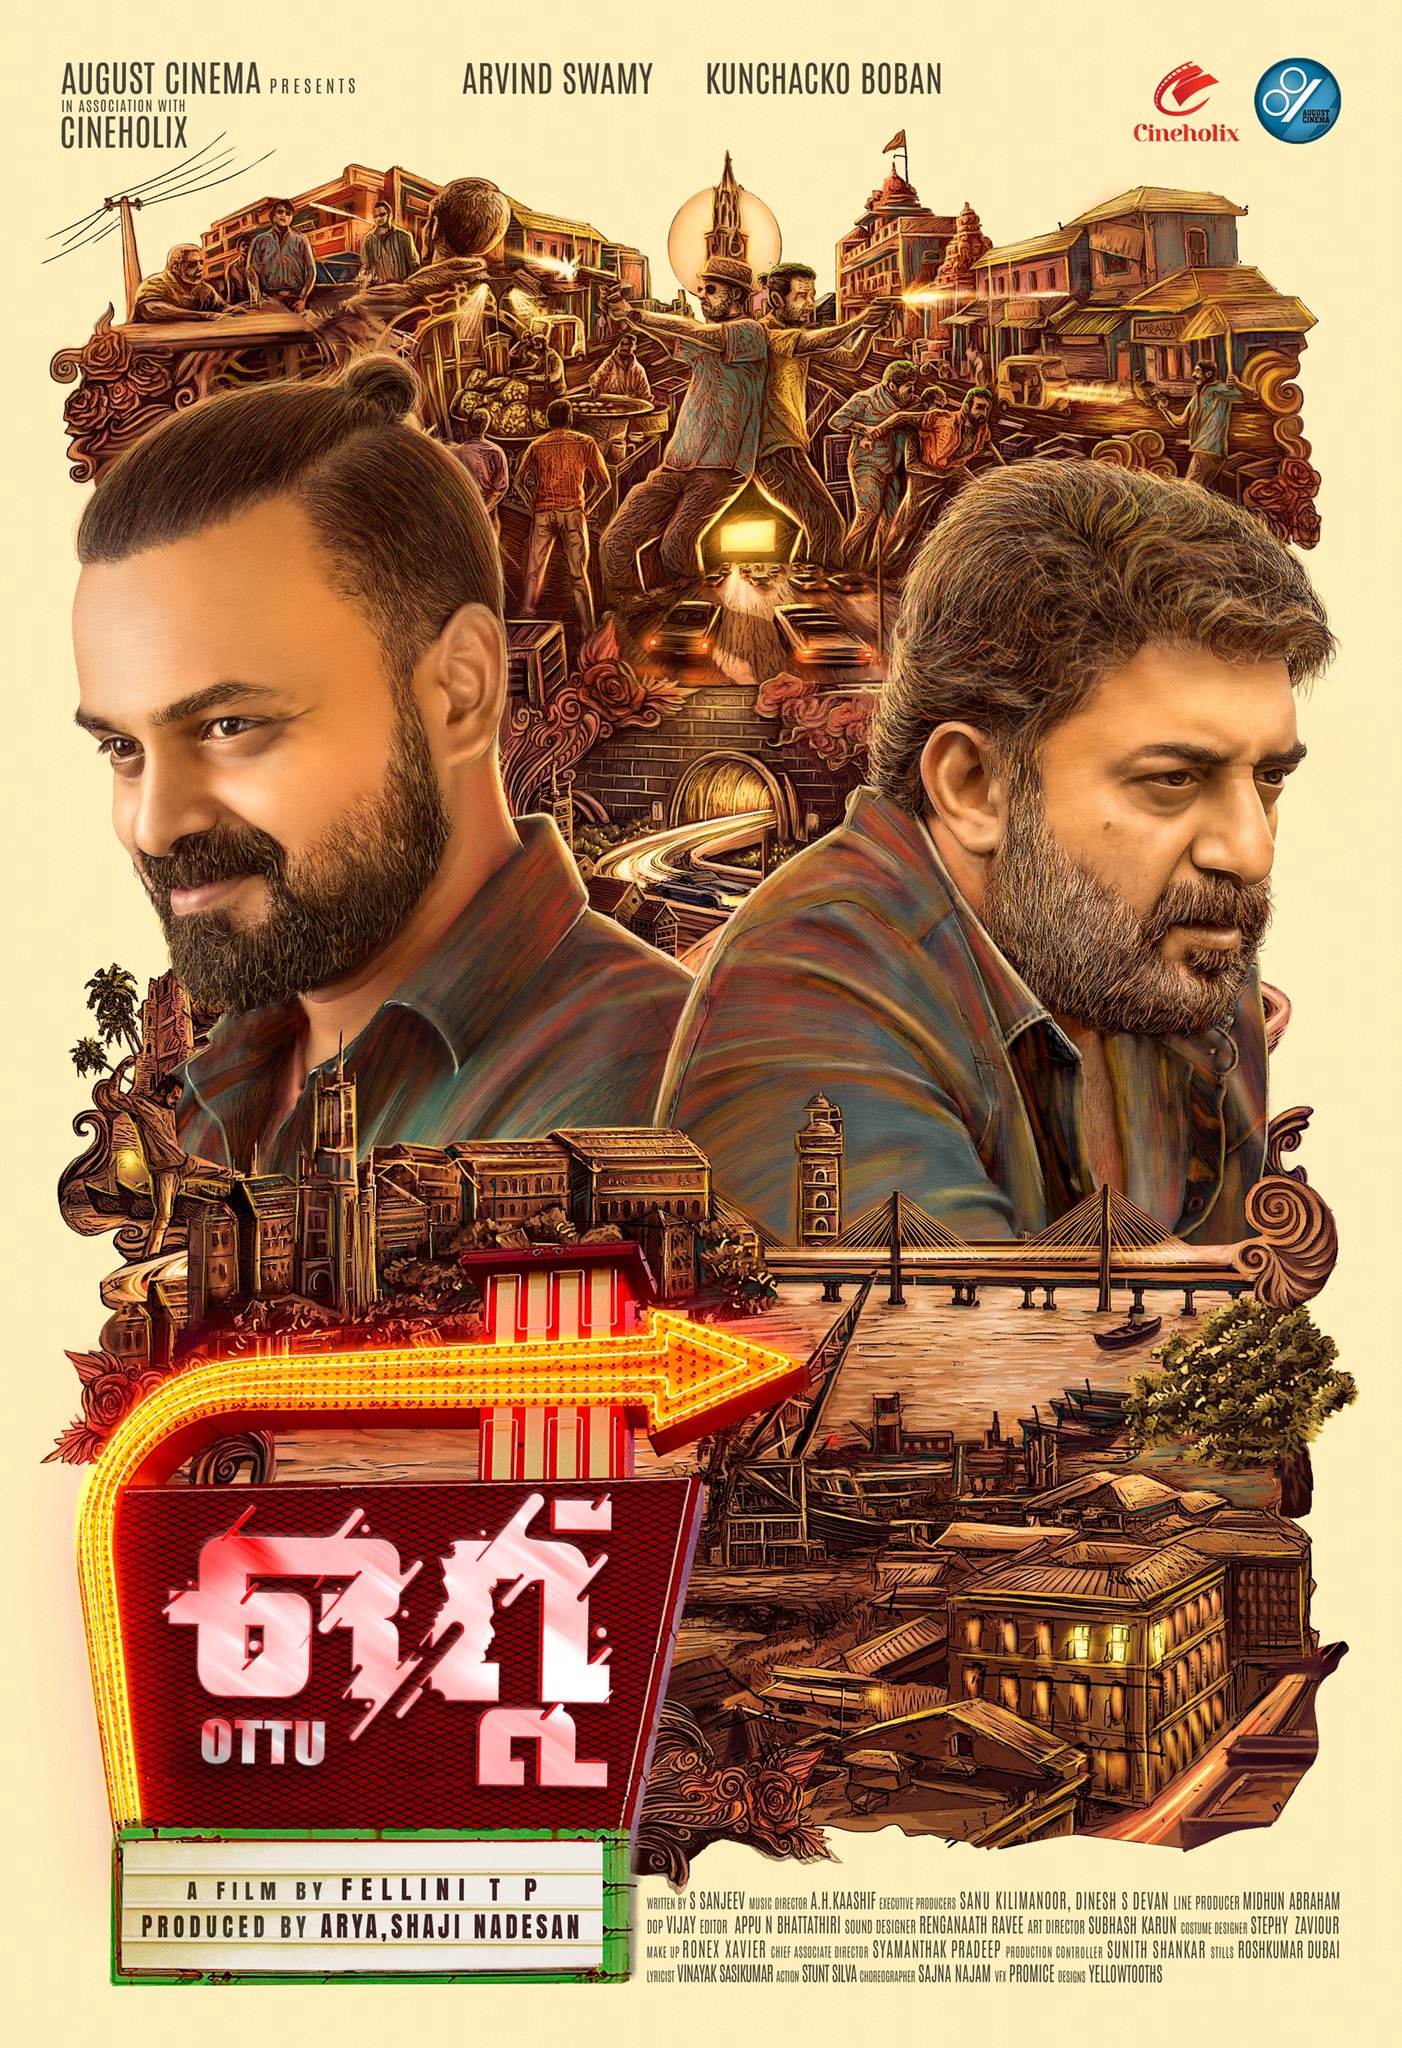 Arya’s next film as a producer has Arvind Swami and Kunchacko Boban ft Rendagam and Ottu